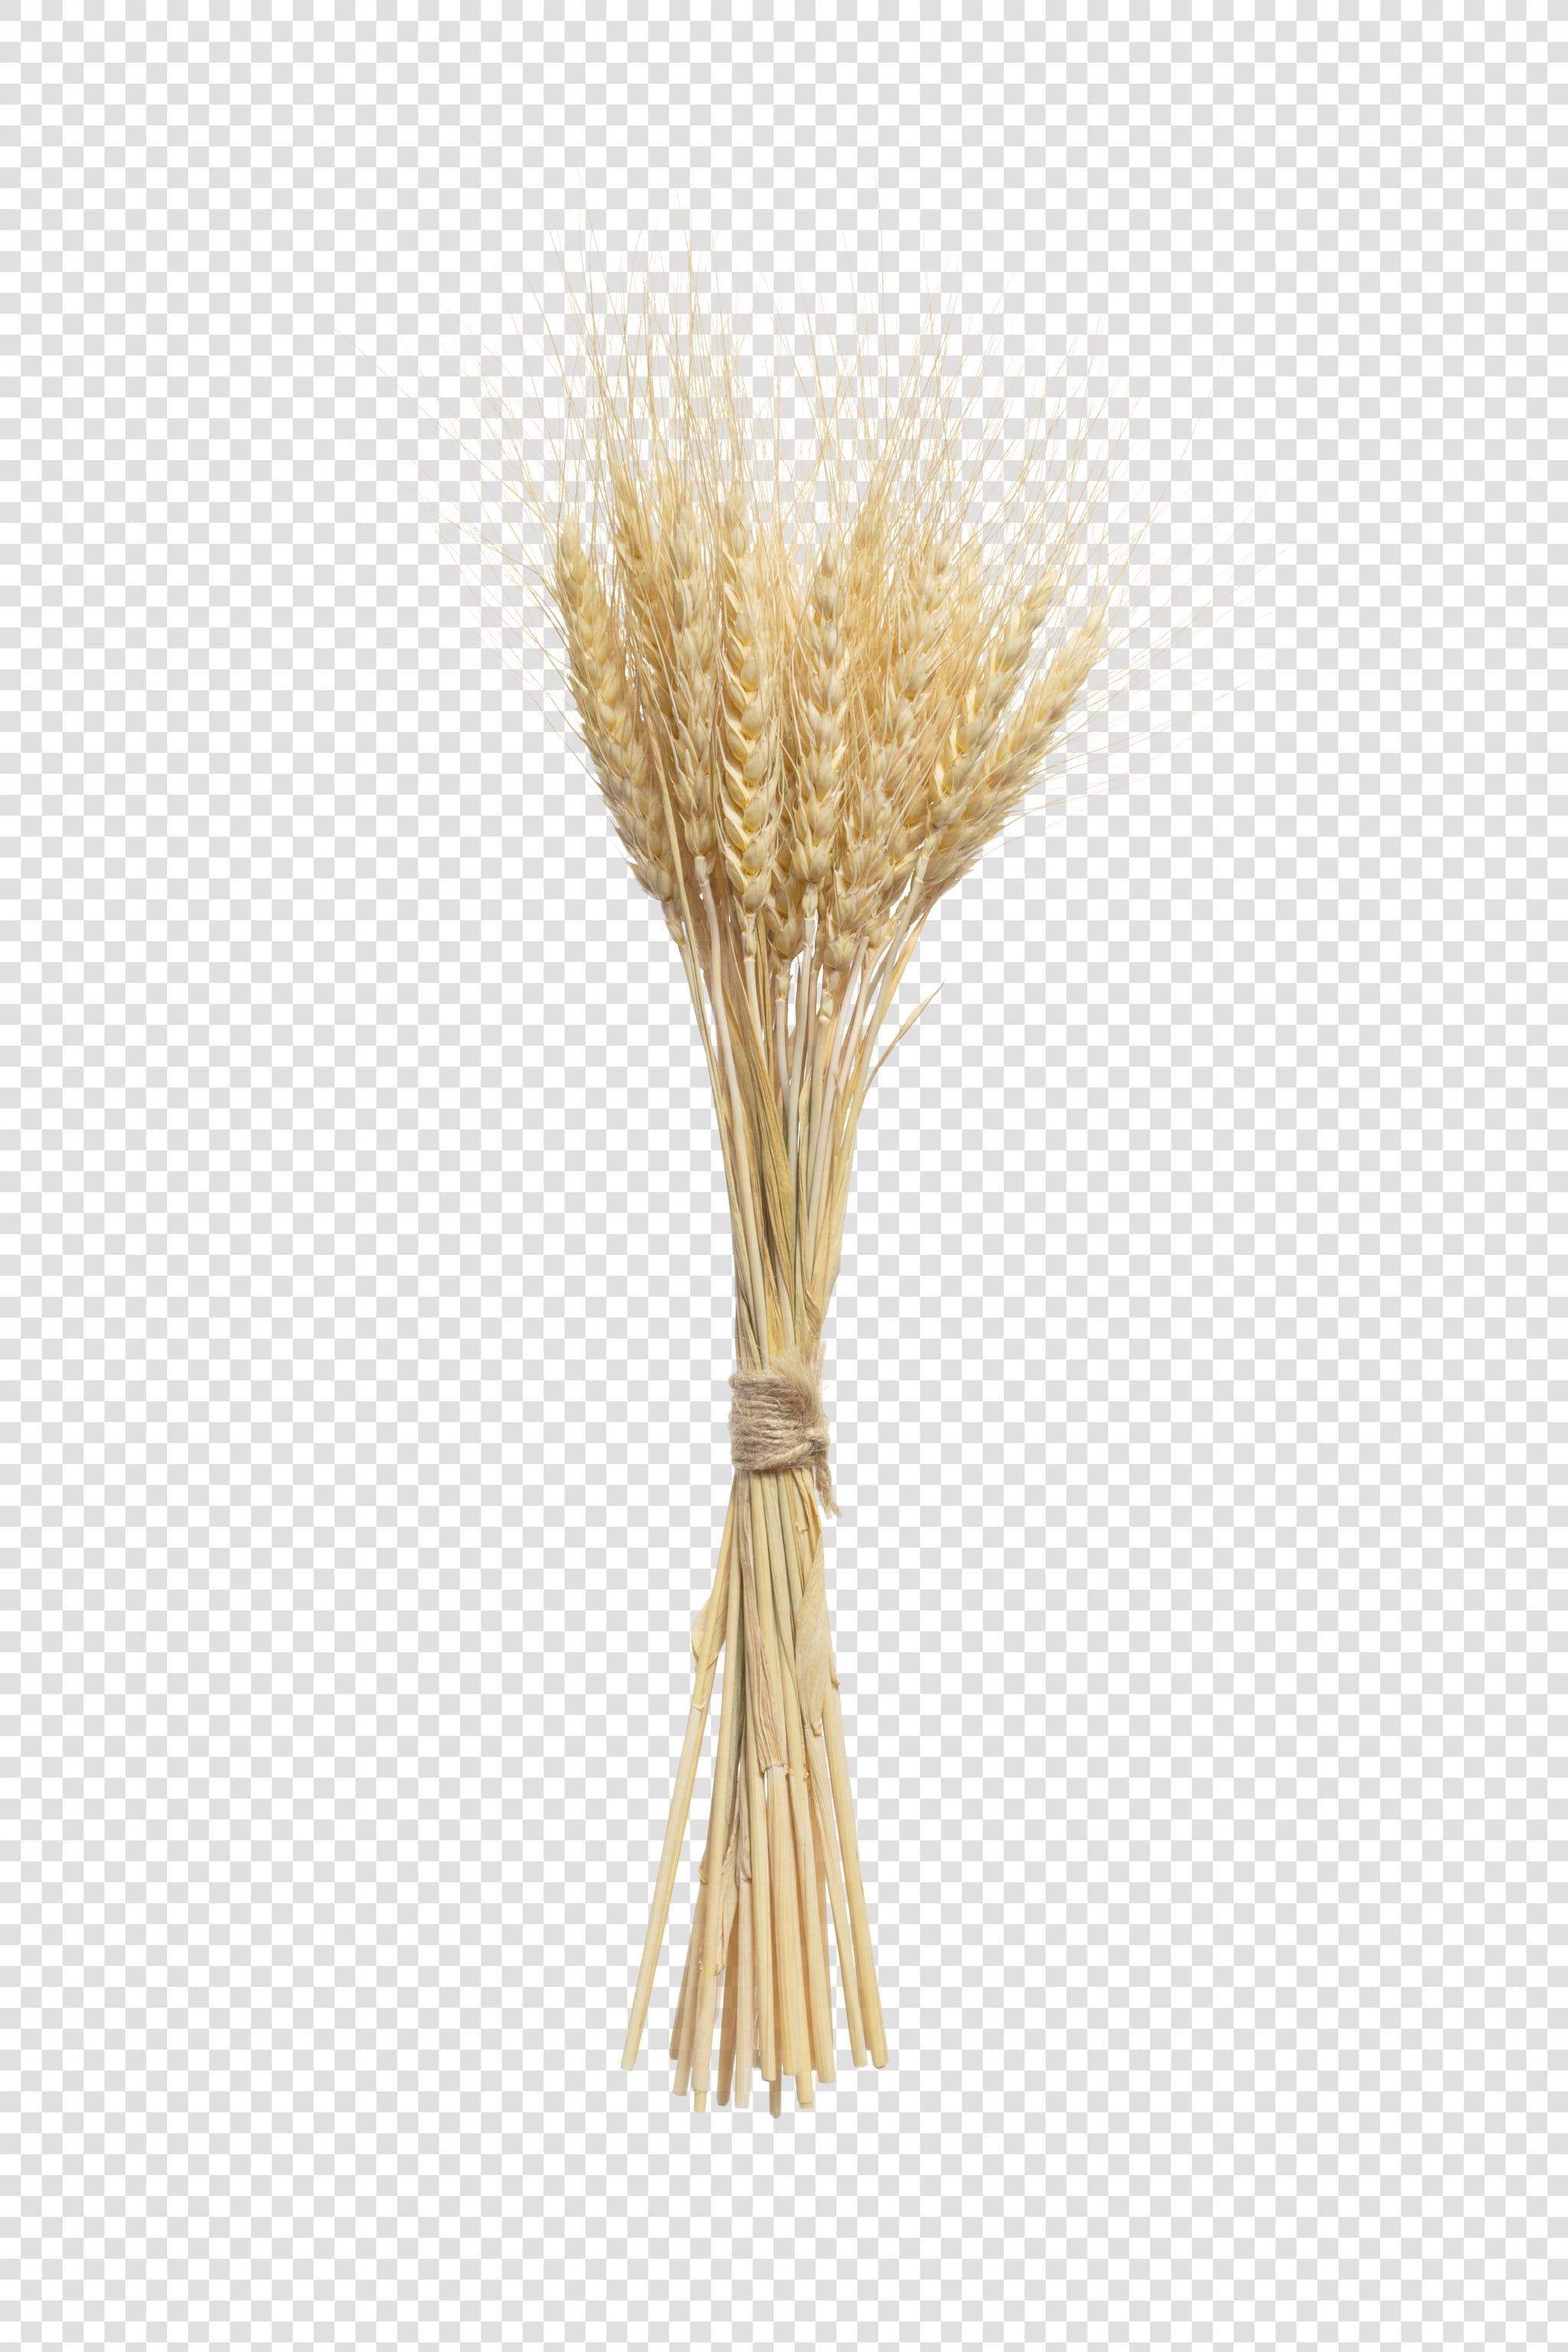 Clean Isolated PSD image of Spikelet on transparent background with separated shadow